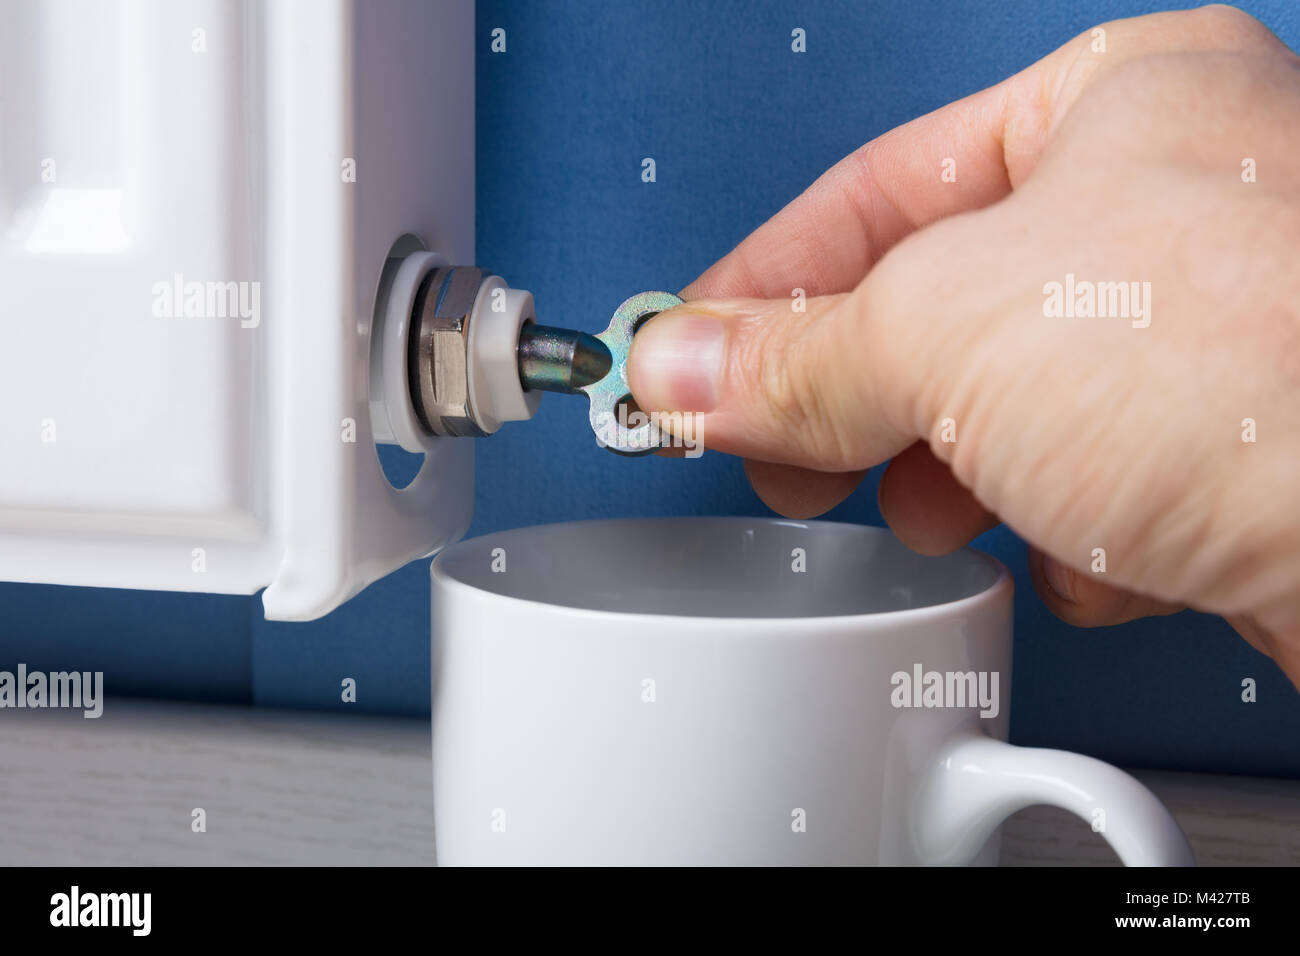 Close-up Of Person's Hand Turning Radiator Bleed Valve To Release Air With Cup At Home Stock Photo